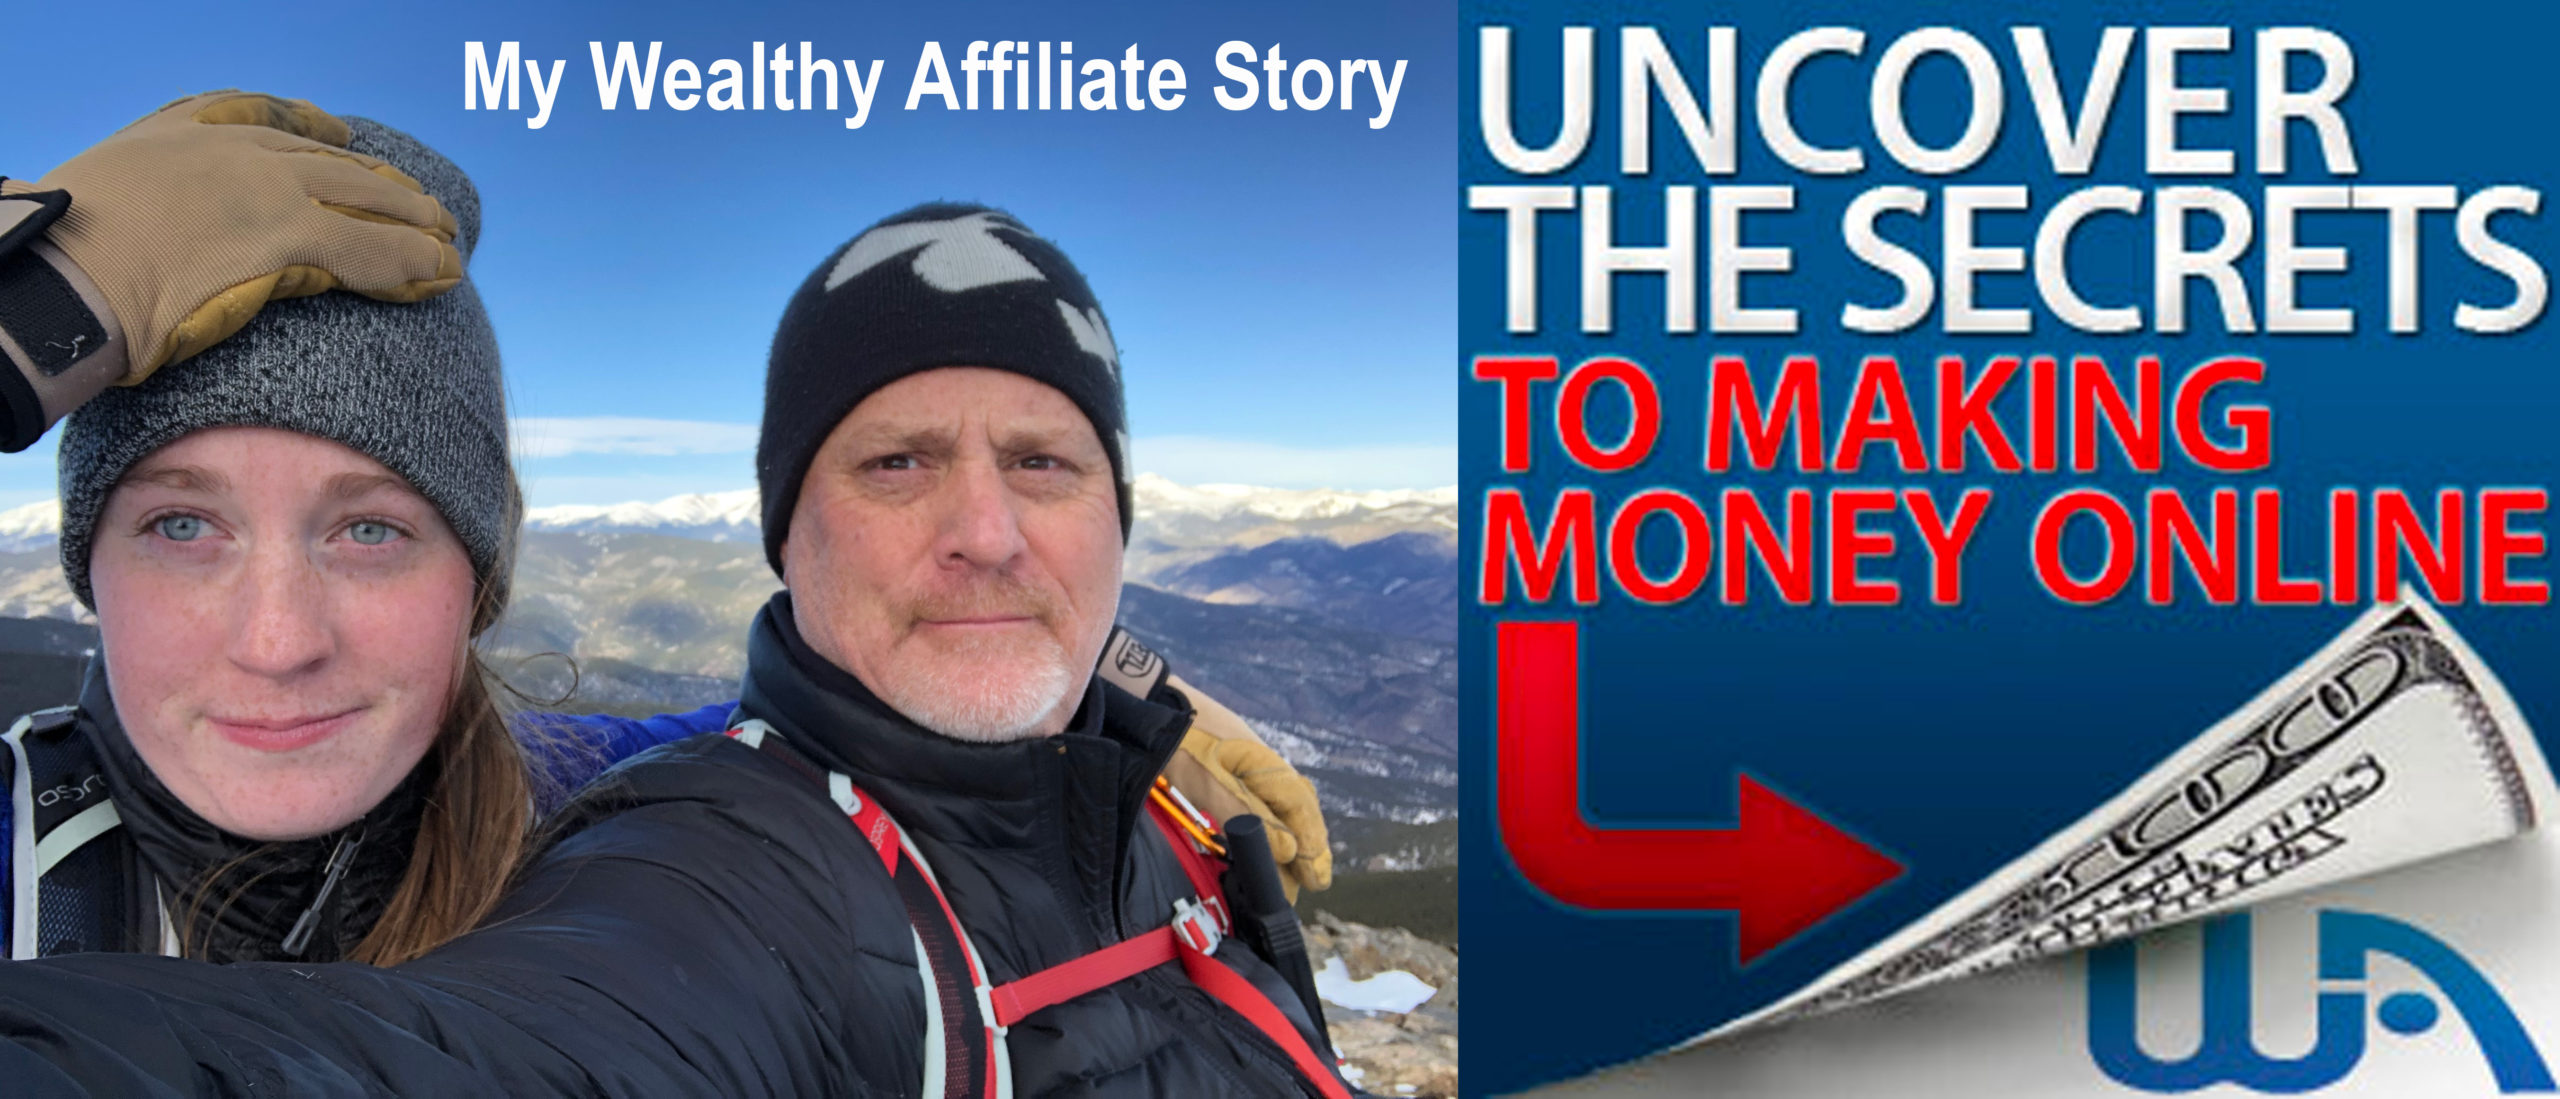 My Wealthy Affiliate Story